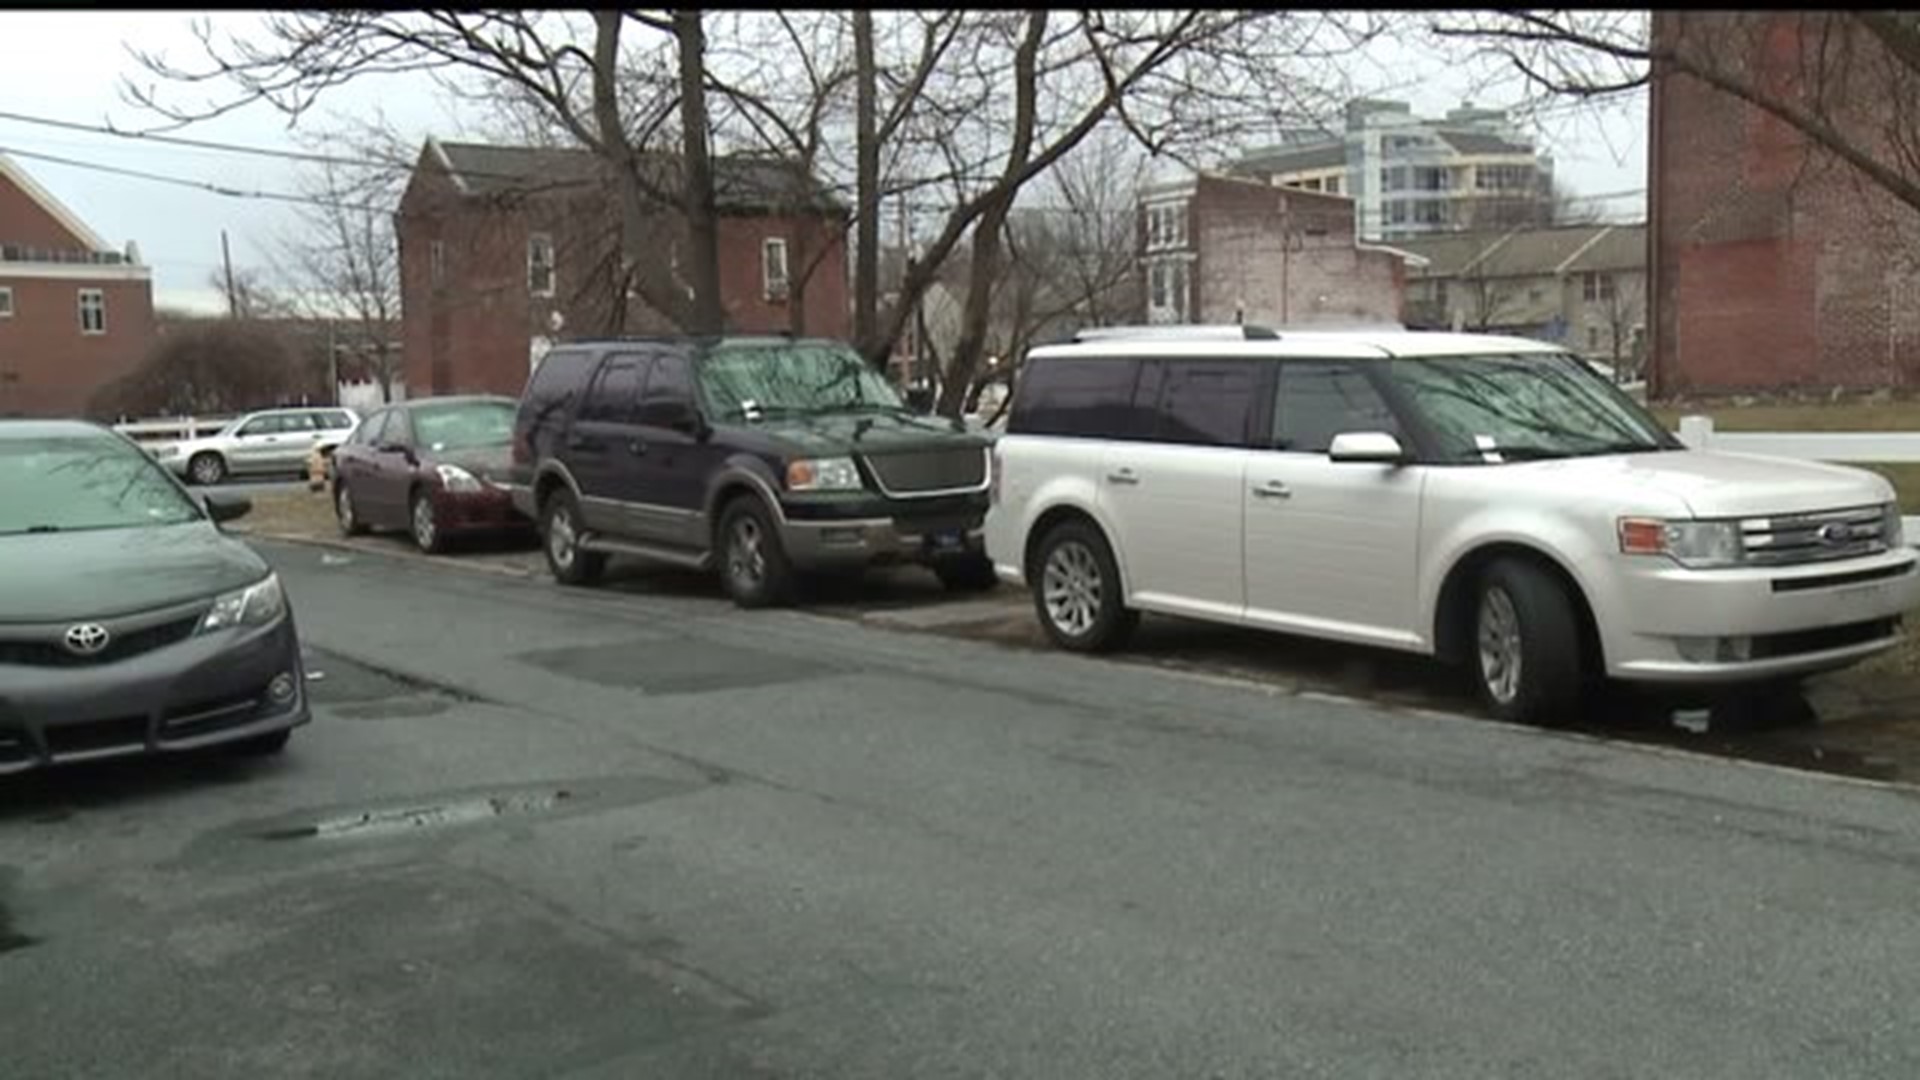 Plan to more than double the number of free parking spots at Broad Street Market considered